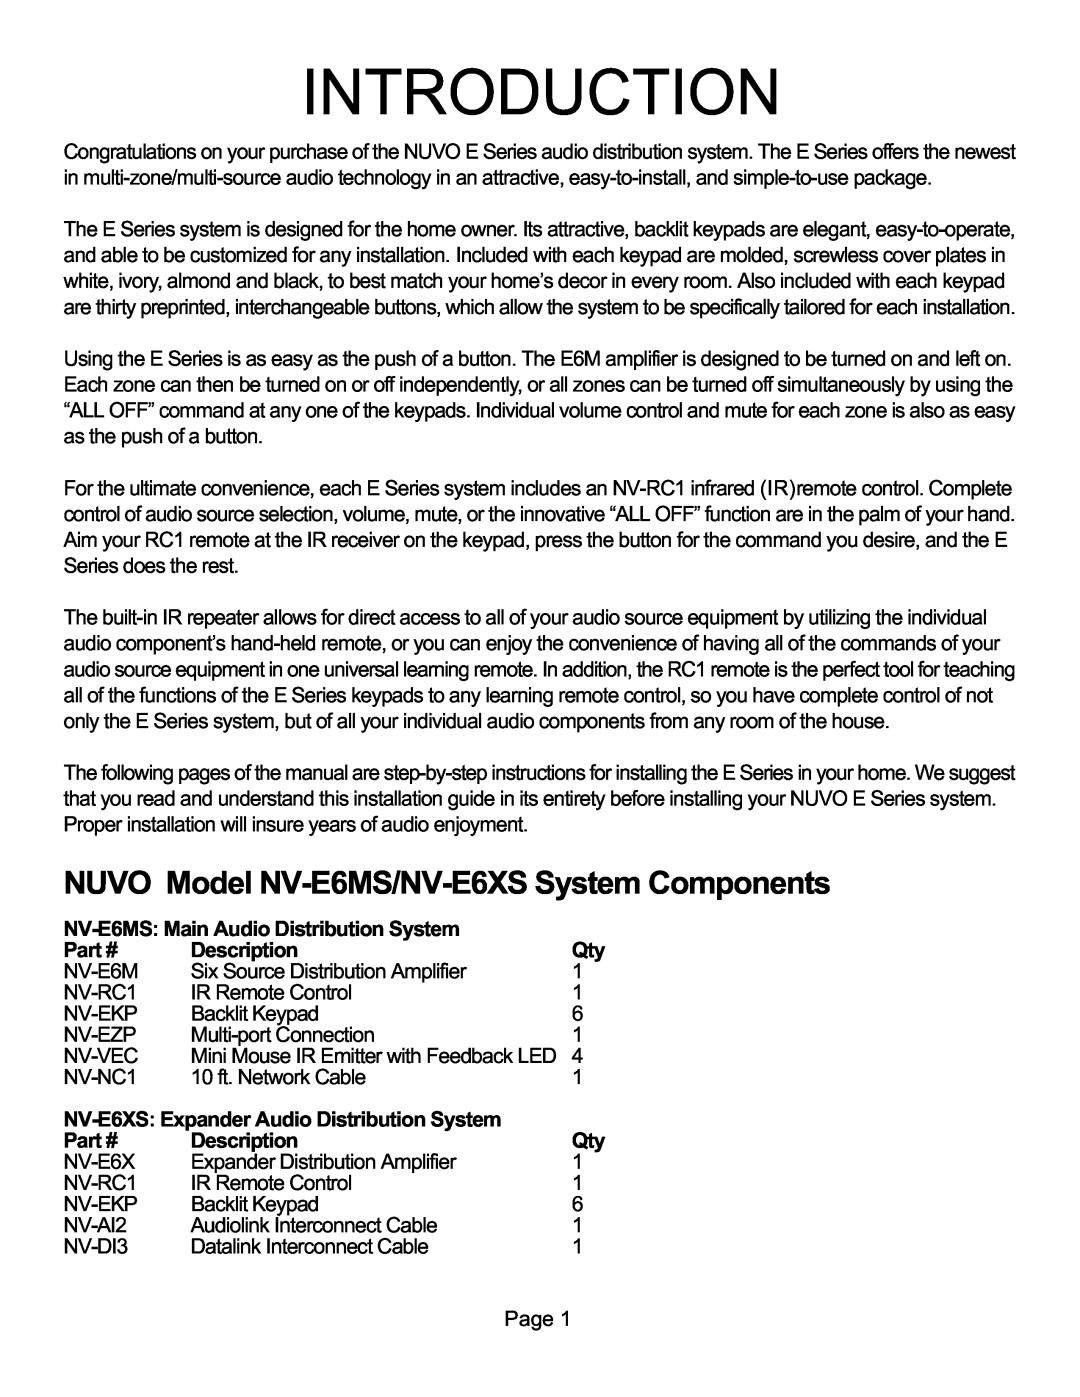 Nuvo manual Introduction, NUVO Model NV-E6MS/NV-E6XSSystem Components 